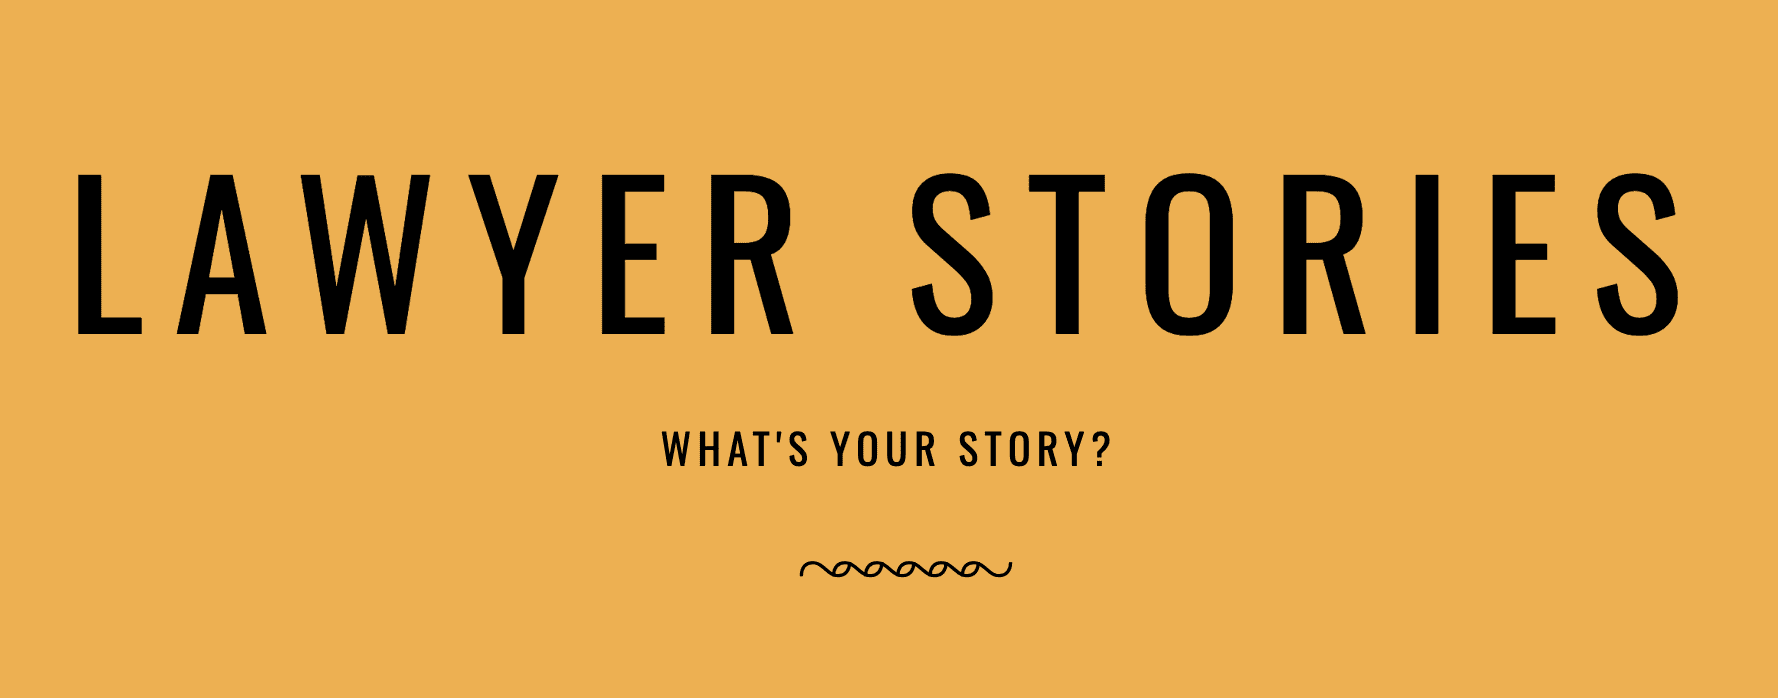 Orange background with black text that reads "LAWYER STORIES" and "What's Your Story?" with a decorative line underneath. Highlighting narratives from diverse legal fields, including insights from Arlington Heights business law attorneys.